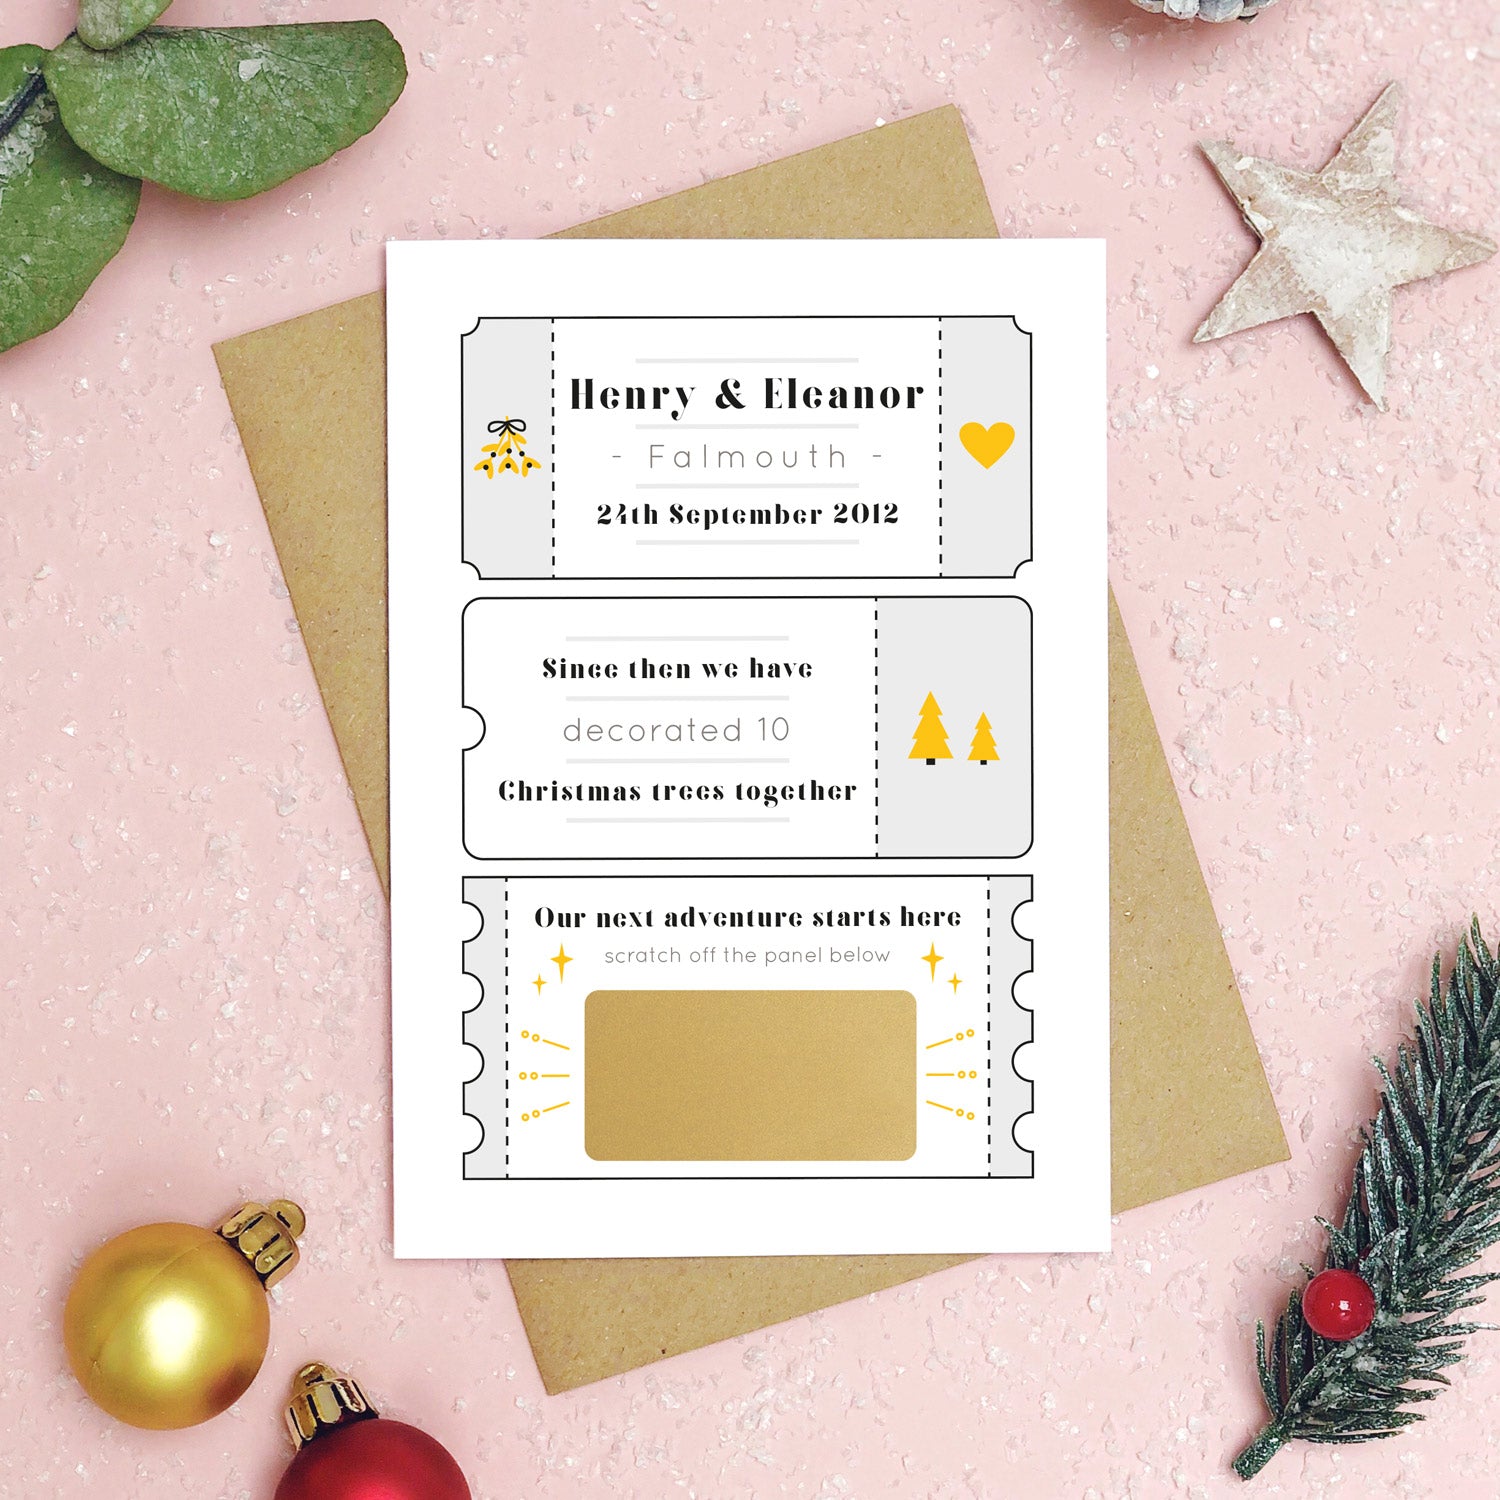 A personalised will you marry me christmas scratch card in grey lying flat a pink background with green foliage and gold and red baubles. The card is split up into tickets and the scratch panel has not yet been scratched off!